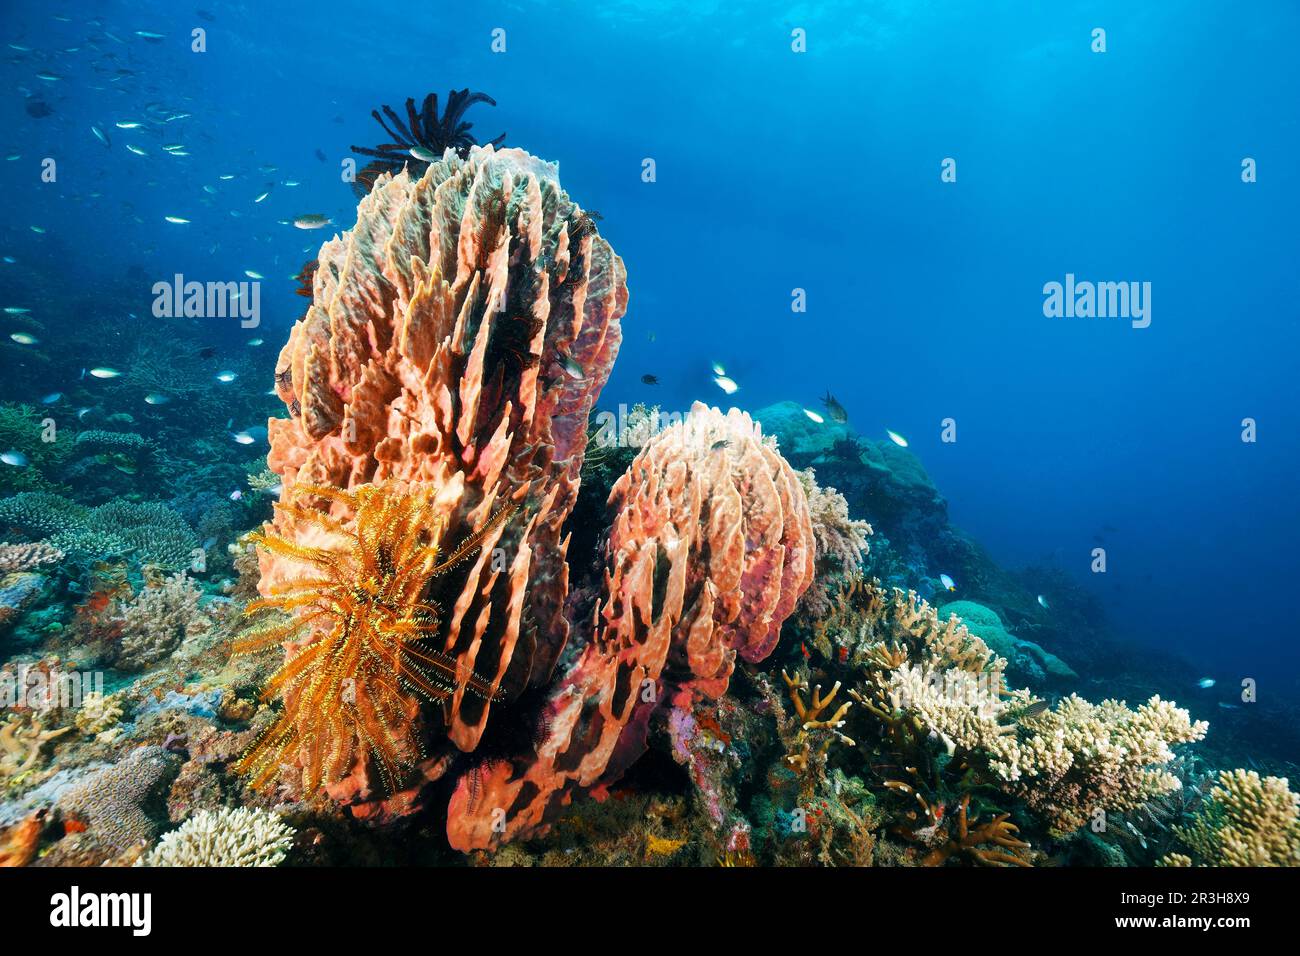 Barrel sponge (Xestospongia testudinaria), below Graziler feather star (Comaster gracilis), yellow, in the back coral reef with various stony corals Stock Photo